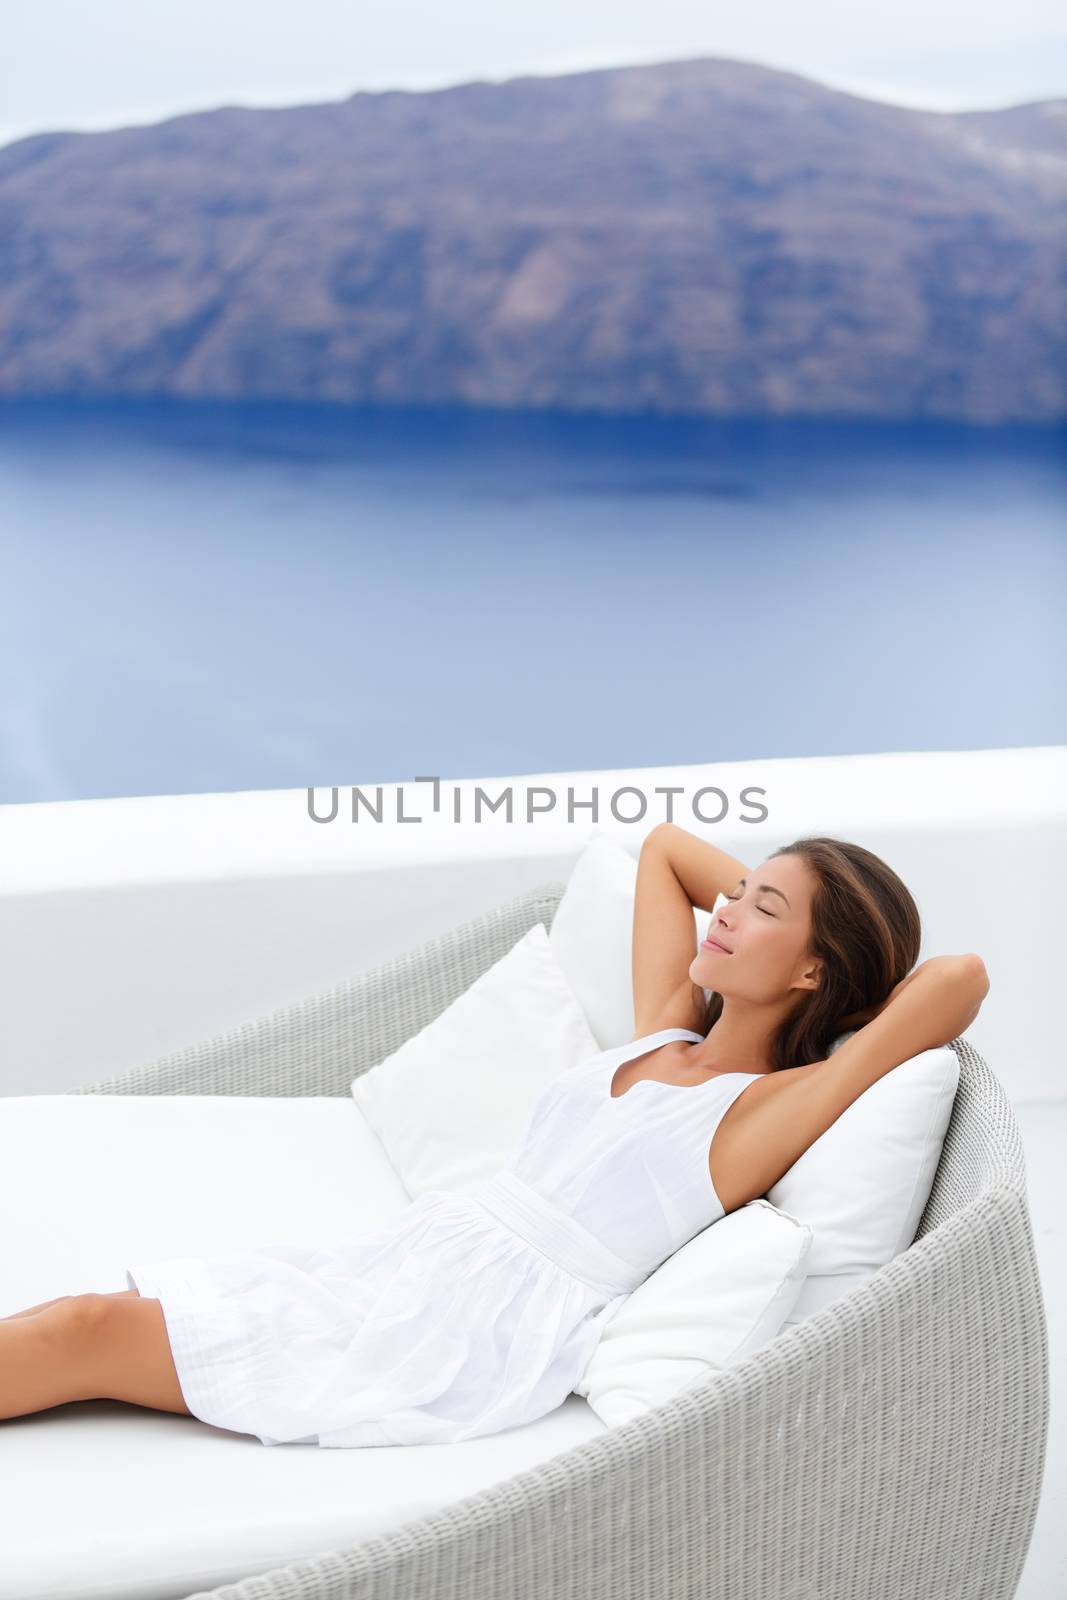 Beautiful young woman relaxing on couch at seaside resort terrace. Attractive female is wearing white sundress. Female with hands behind head is relaxing on lounge chair against sea and mountain.